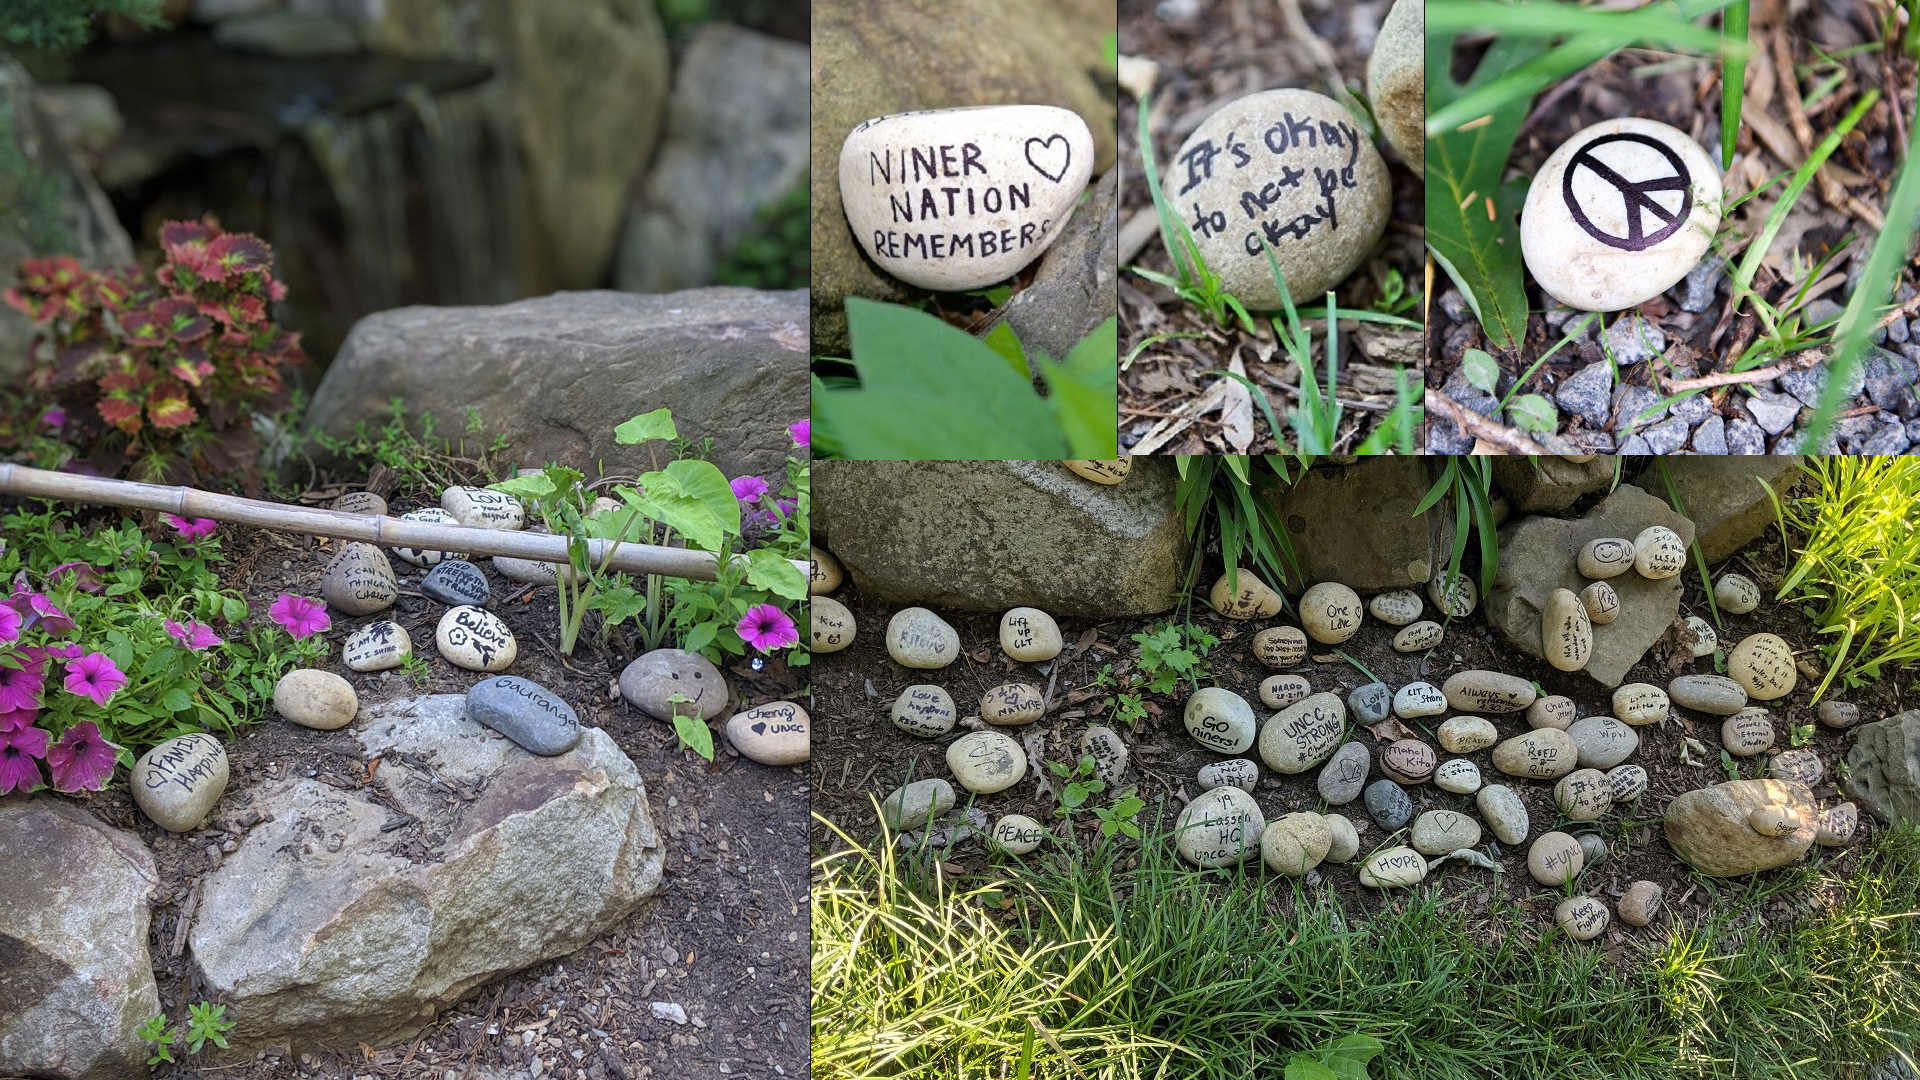 stones in the garden, with messages for Niner Nation